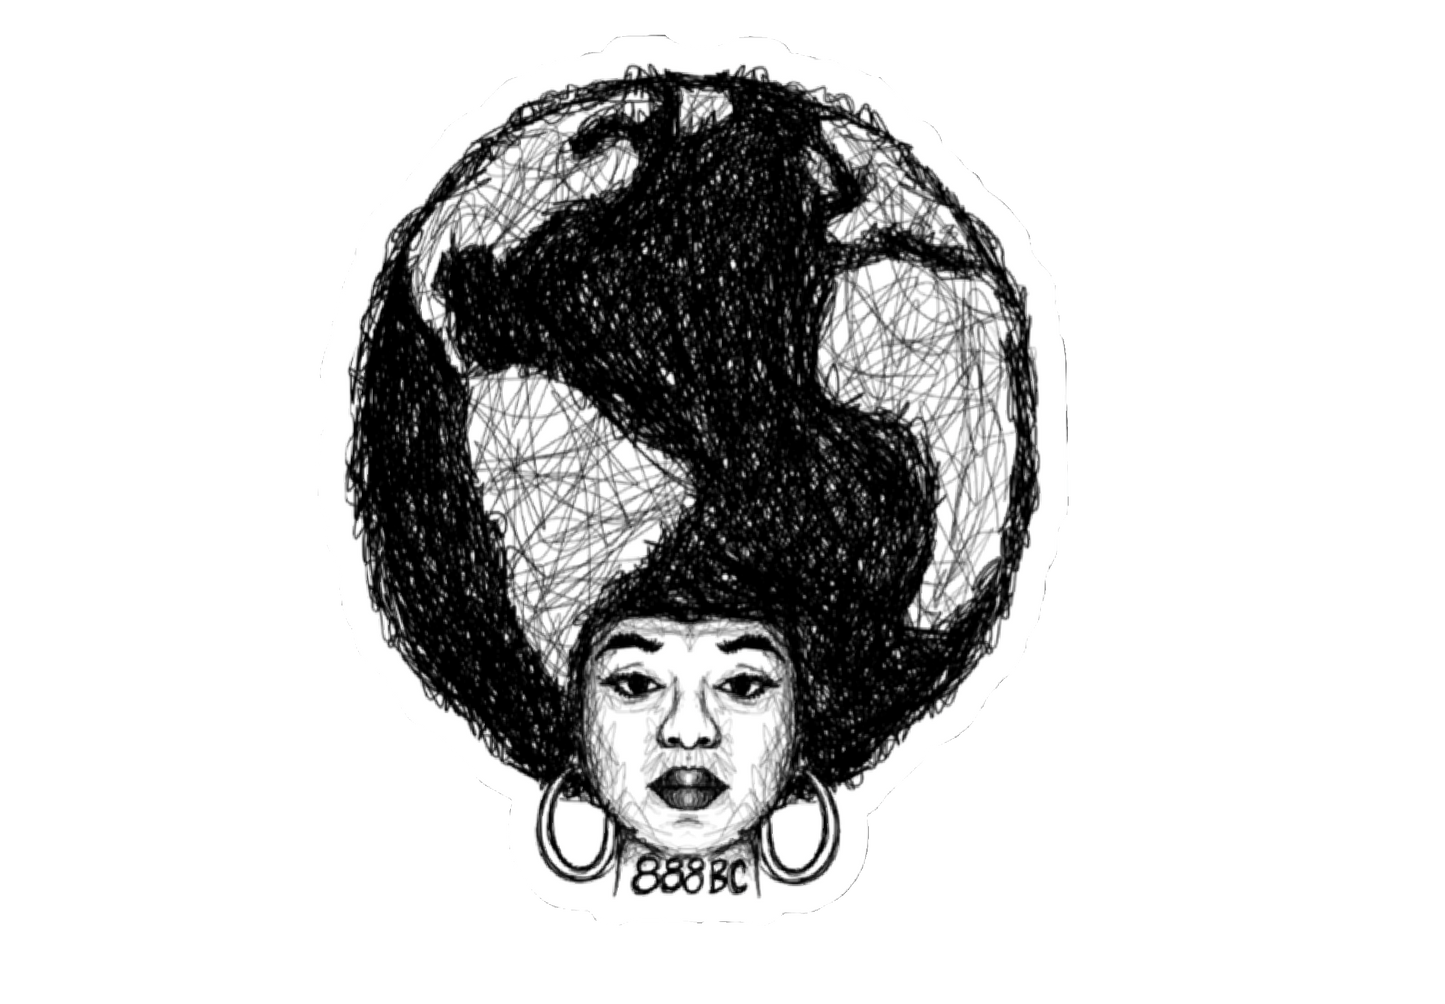 Afro stickers